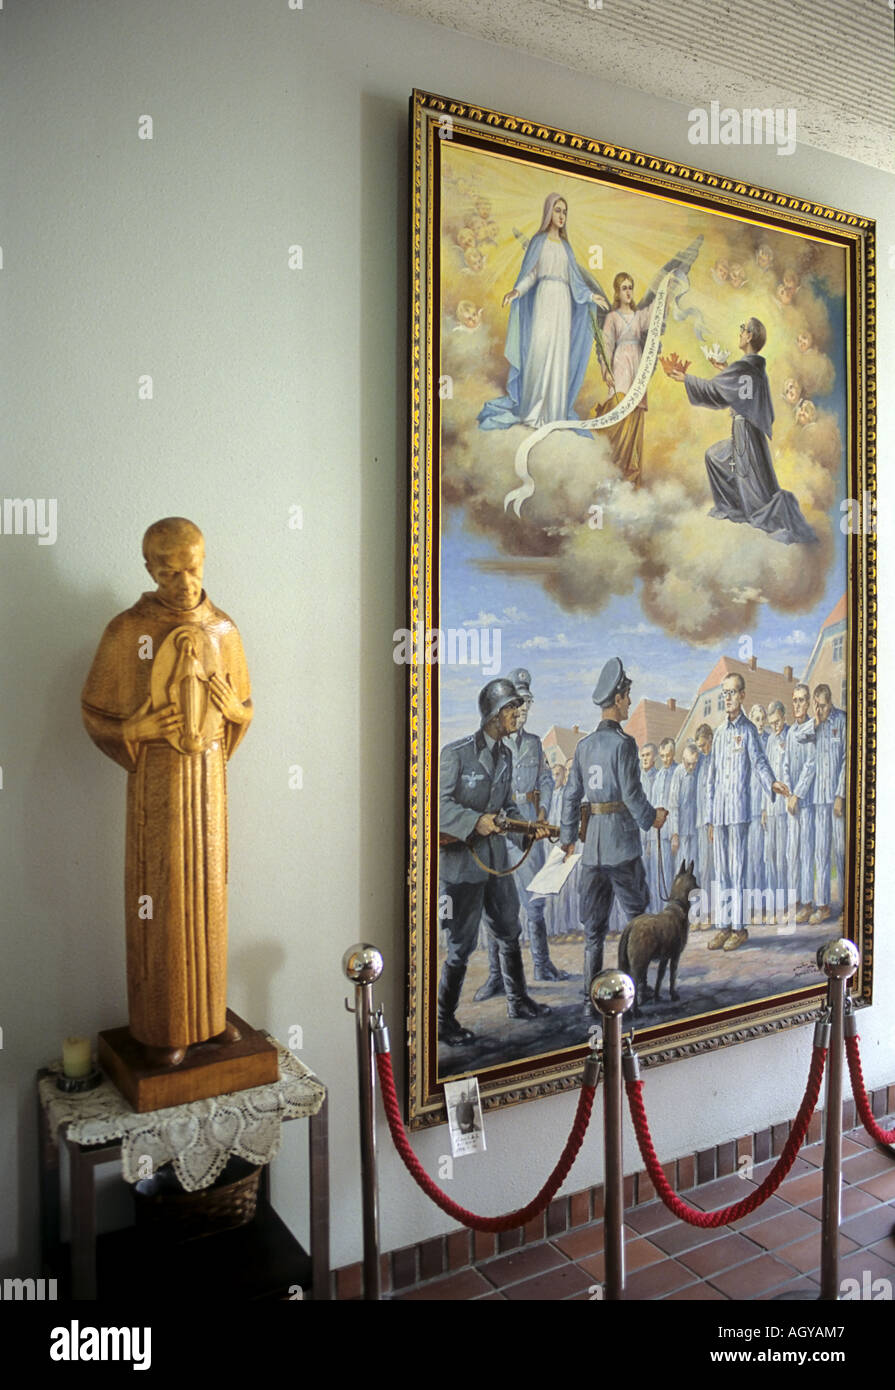 Statue and painting representing St Maximilian Kolbe martyr - Catholic Church of The Immaculate founded by the Saint in Nagasaki Stock Photo